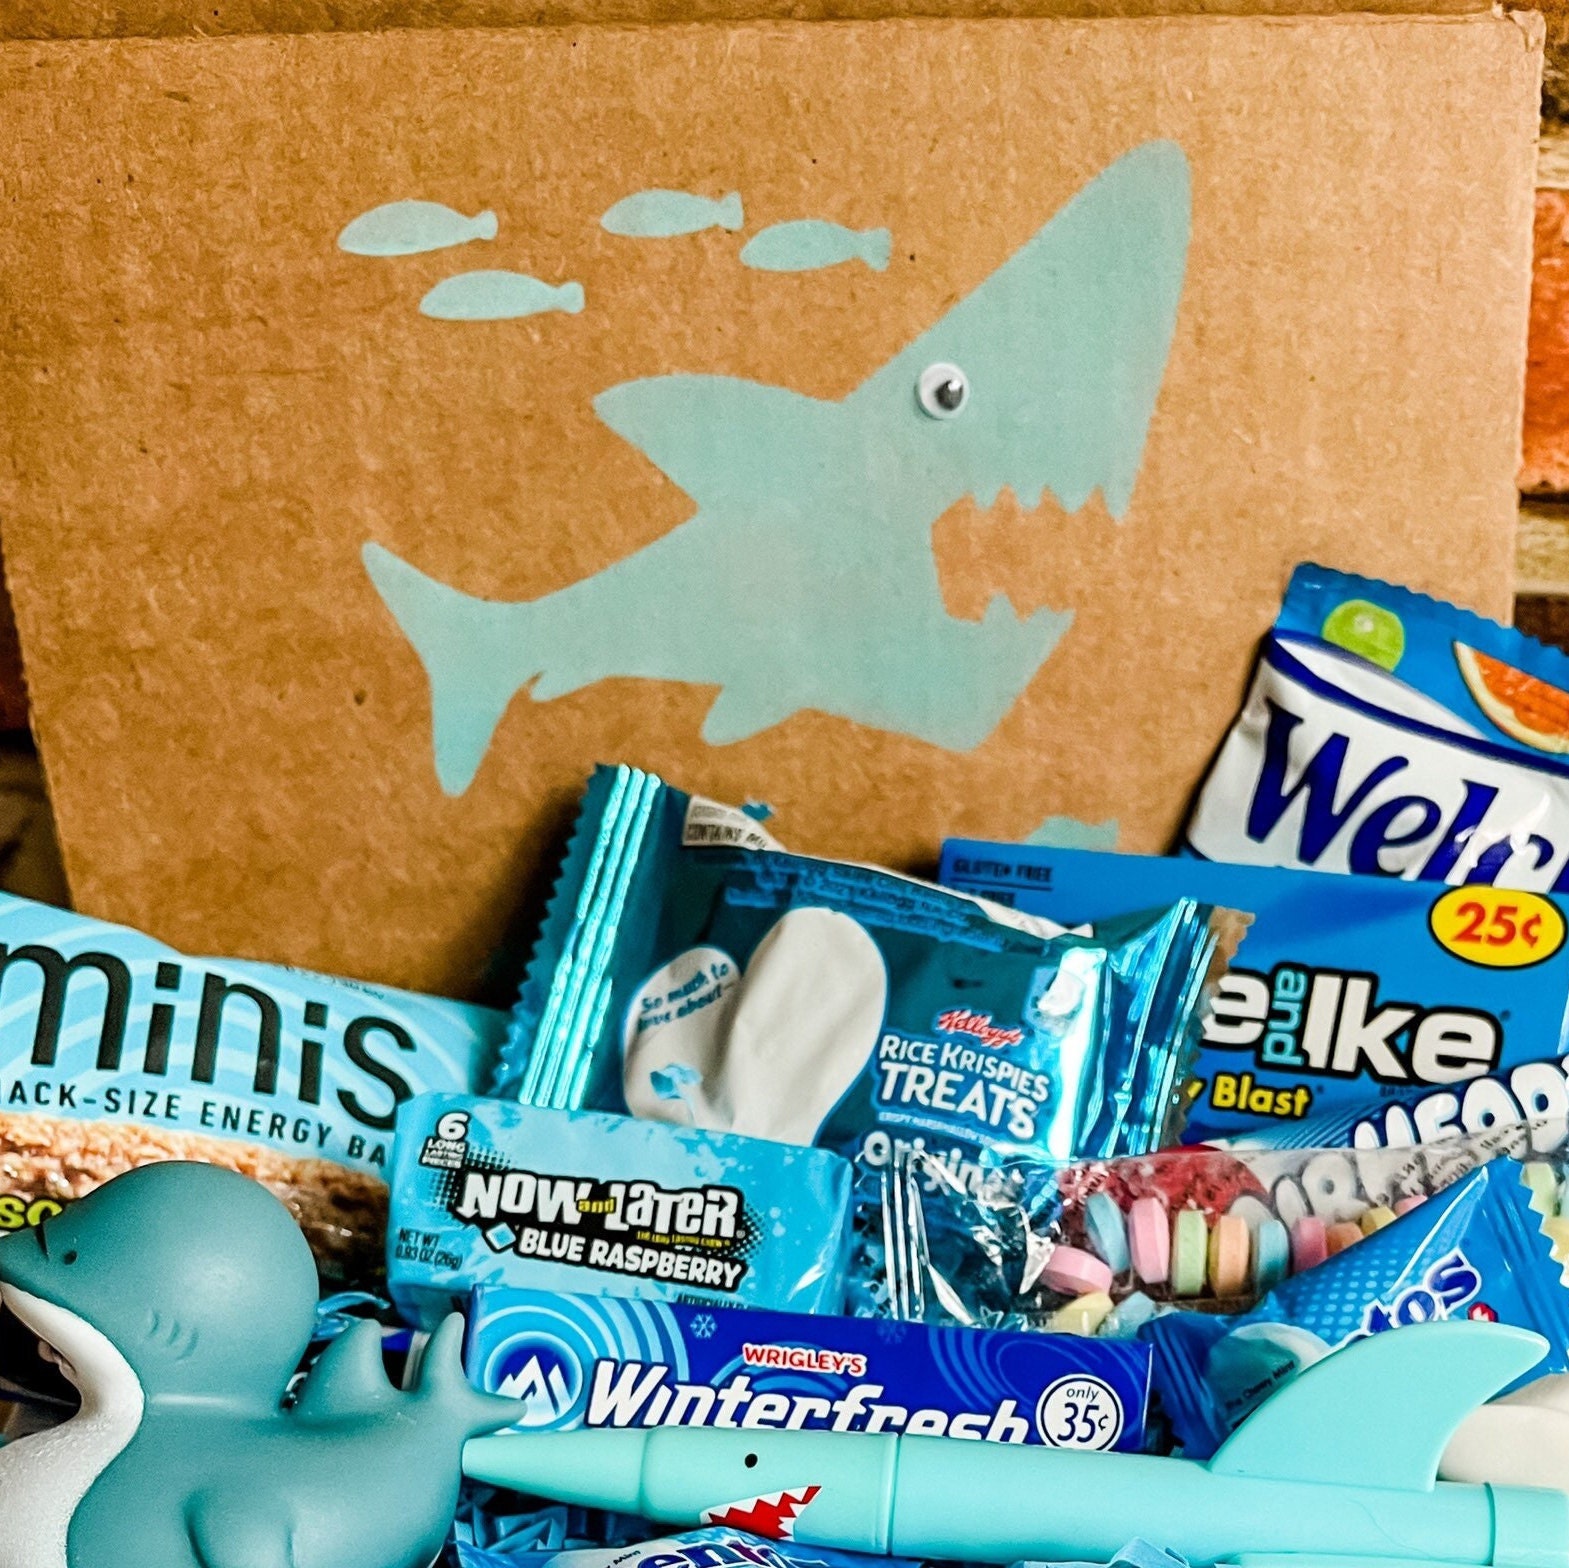 Shark Snack Box & Ice Pack, 6 x 6 x 2.5 inches, Mardel